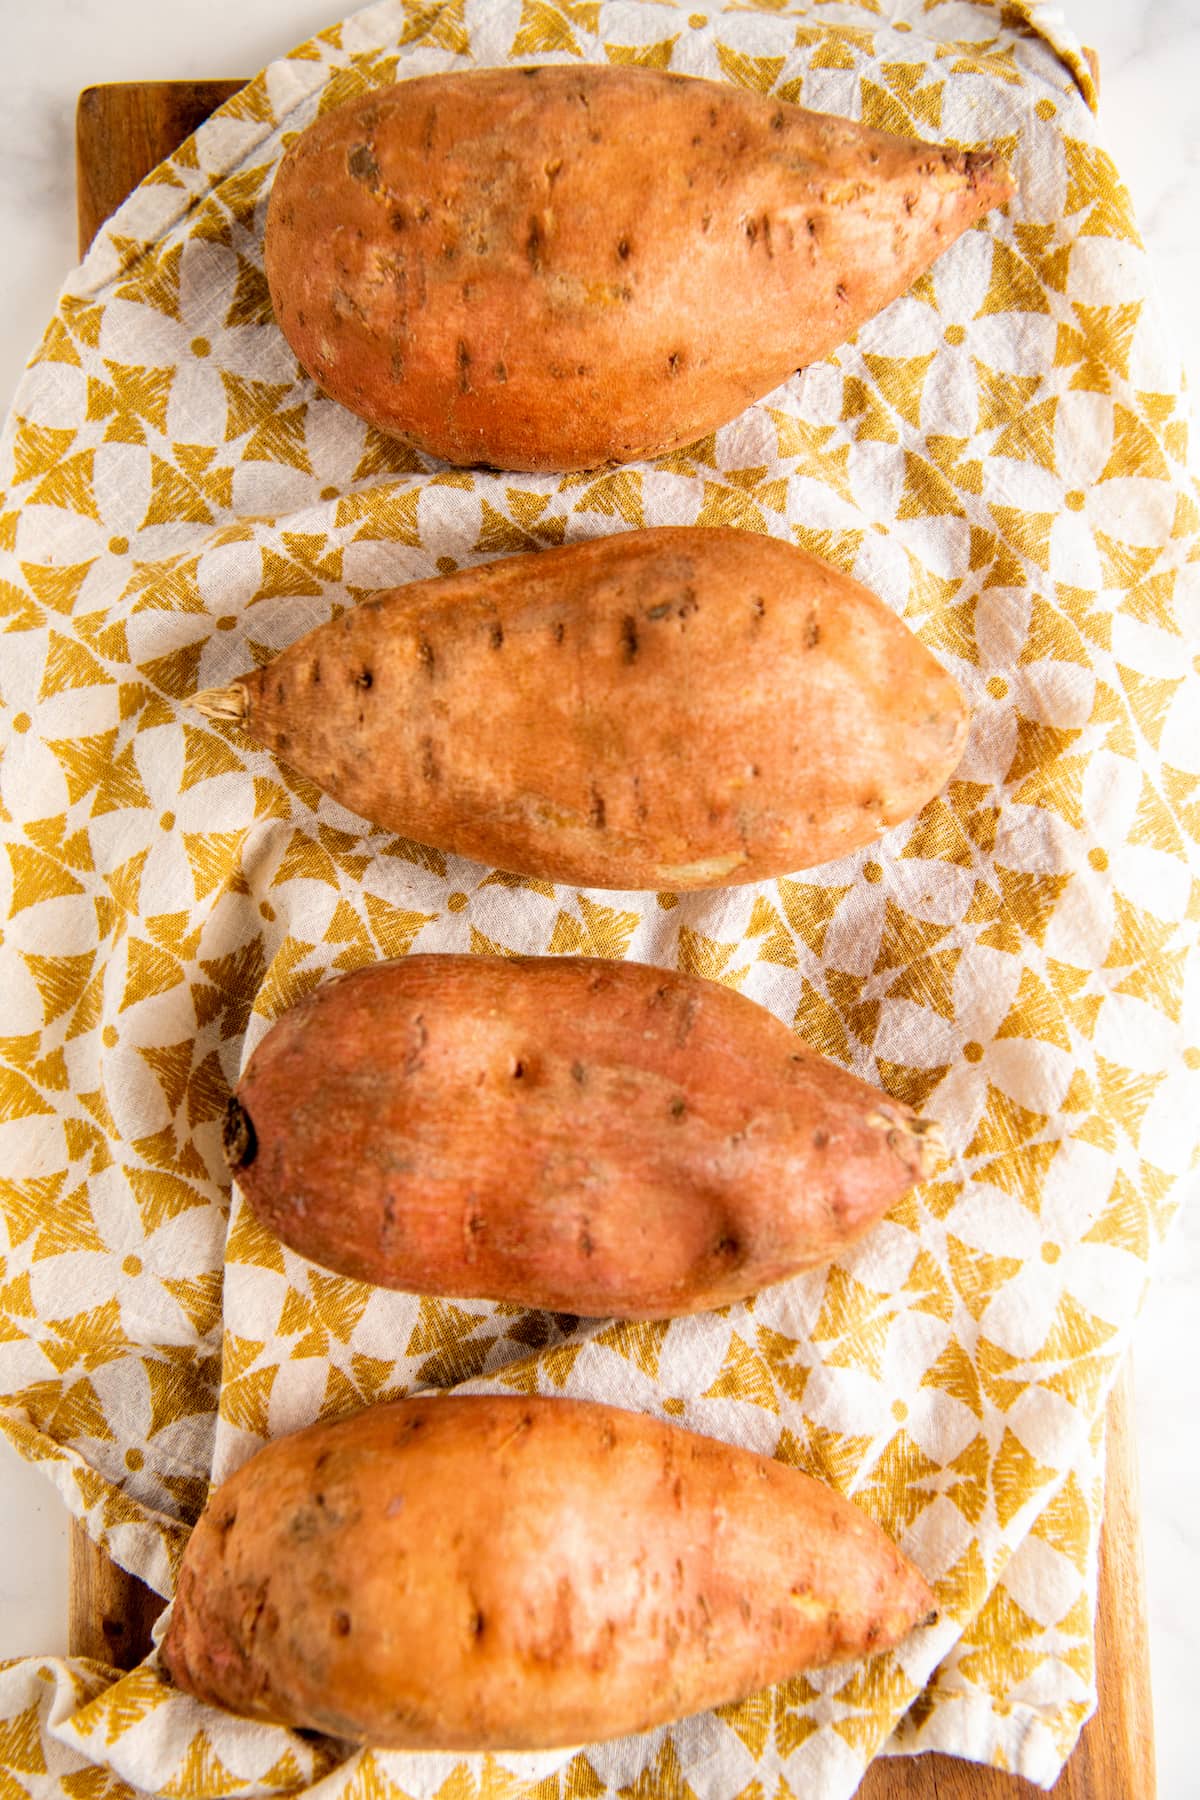 4 sweet potatoes set out on a yellow and white cloth.